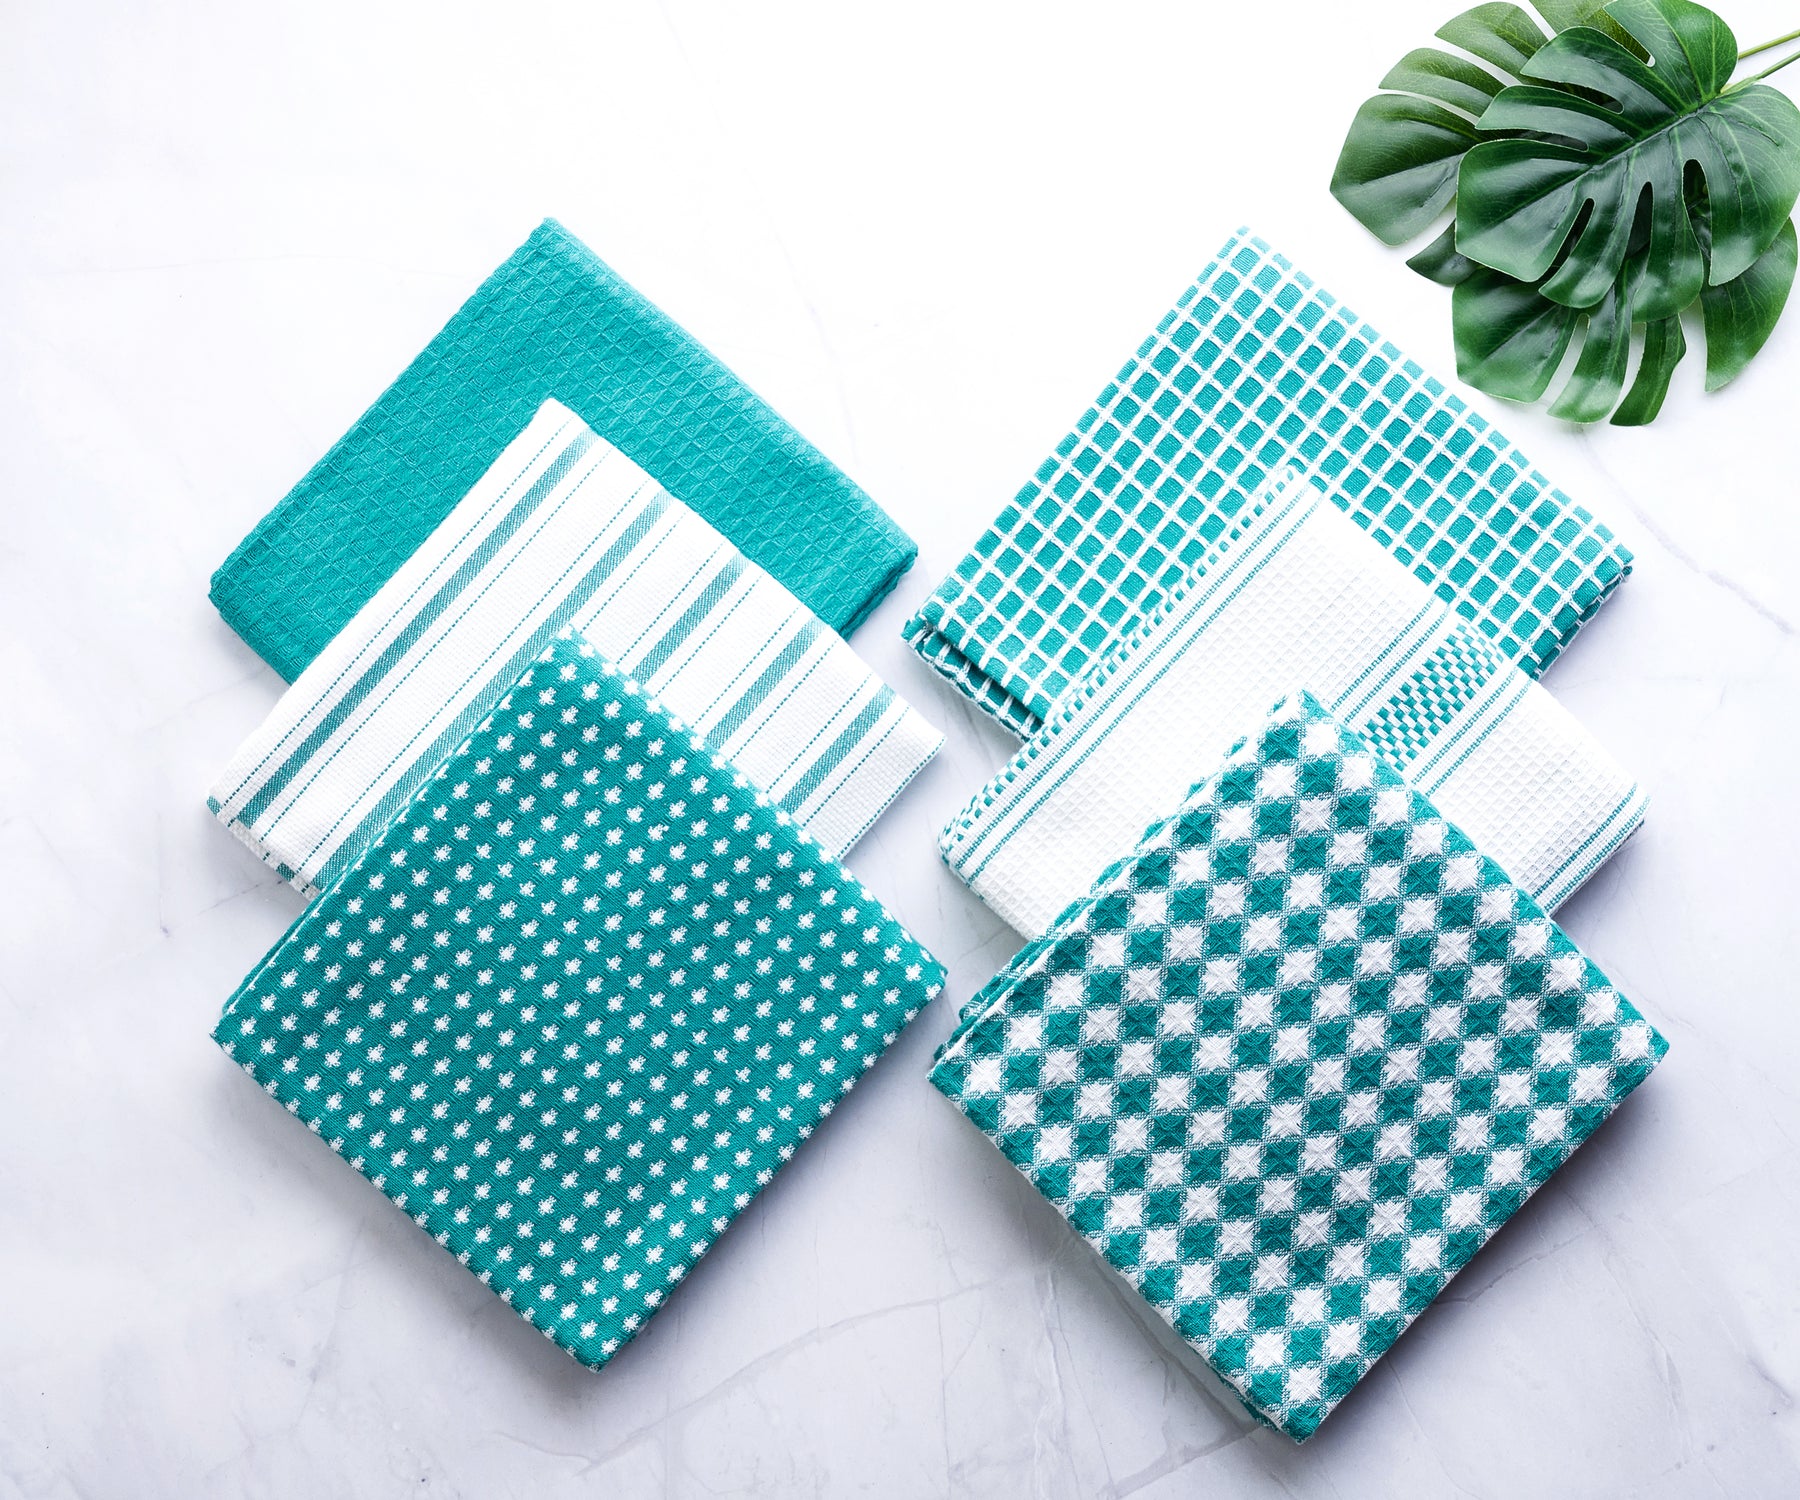 teal kitchen towels, linen kitchen towels for parties, farmhouse dish towels are use for easter parties.